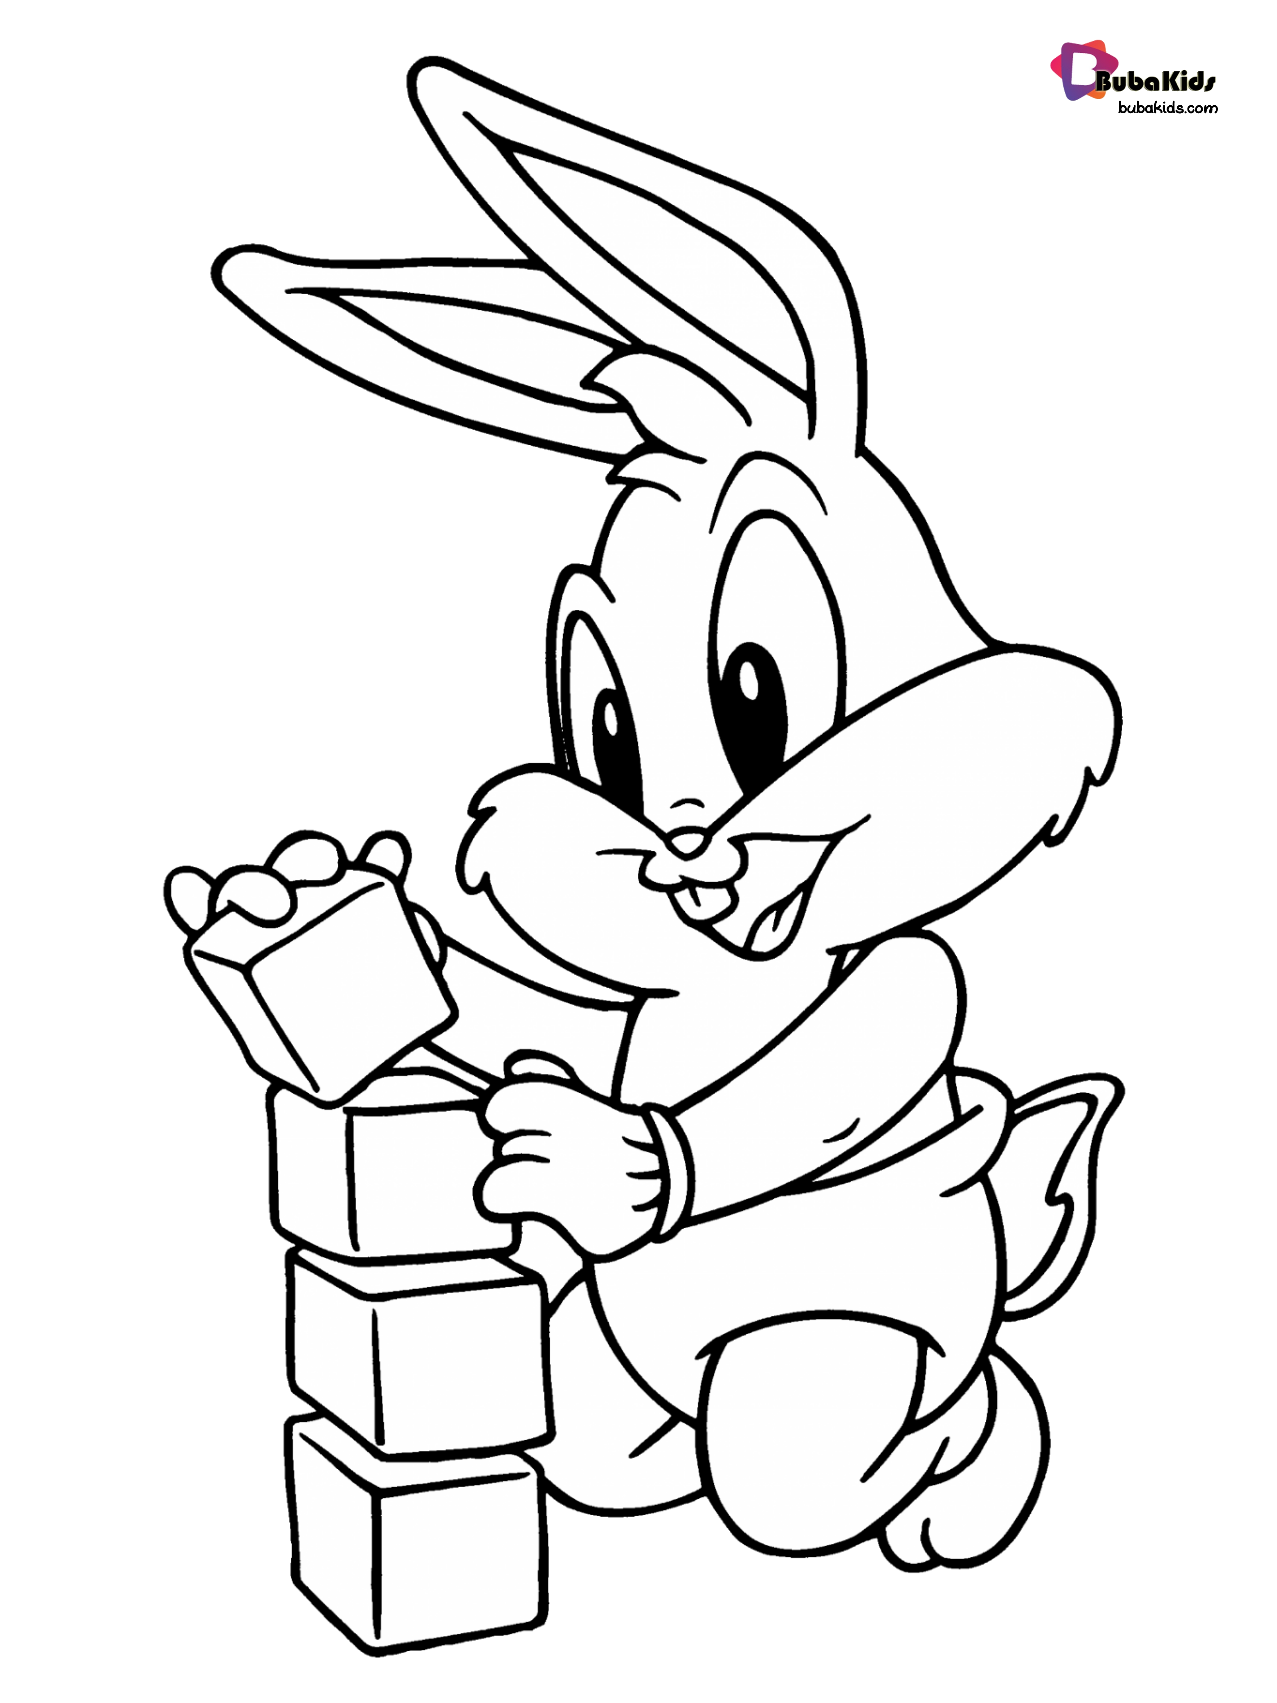 Free download cute little rabbit coloring pages - BubaKids.com